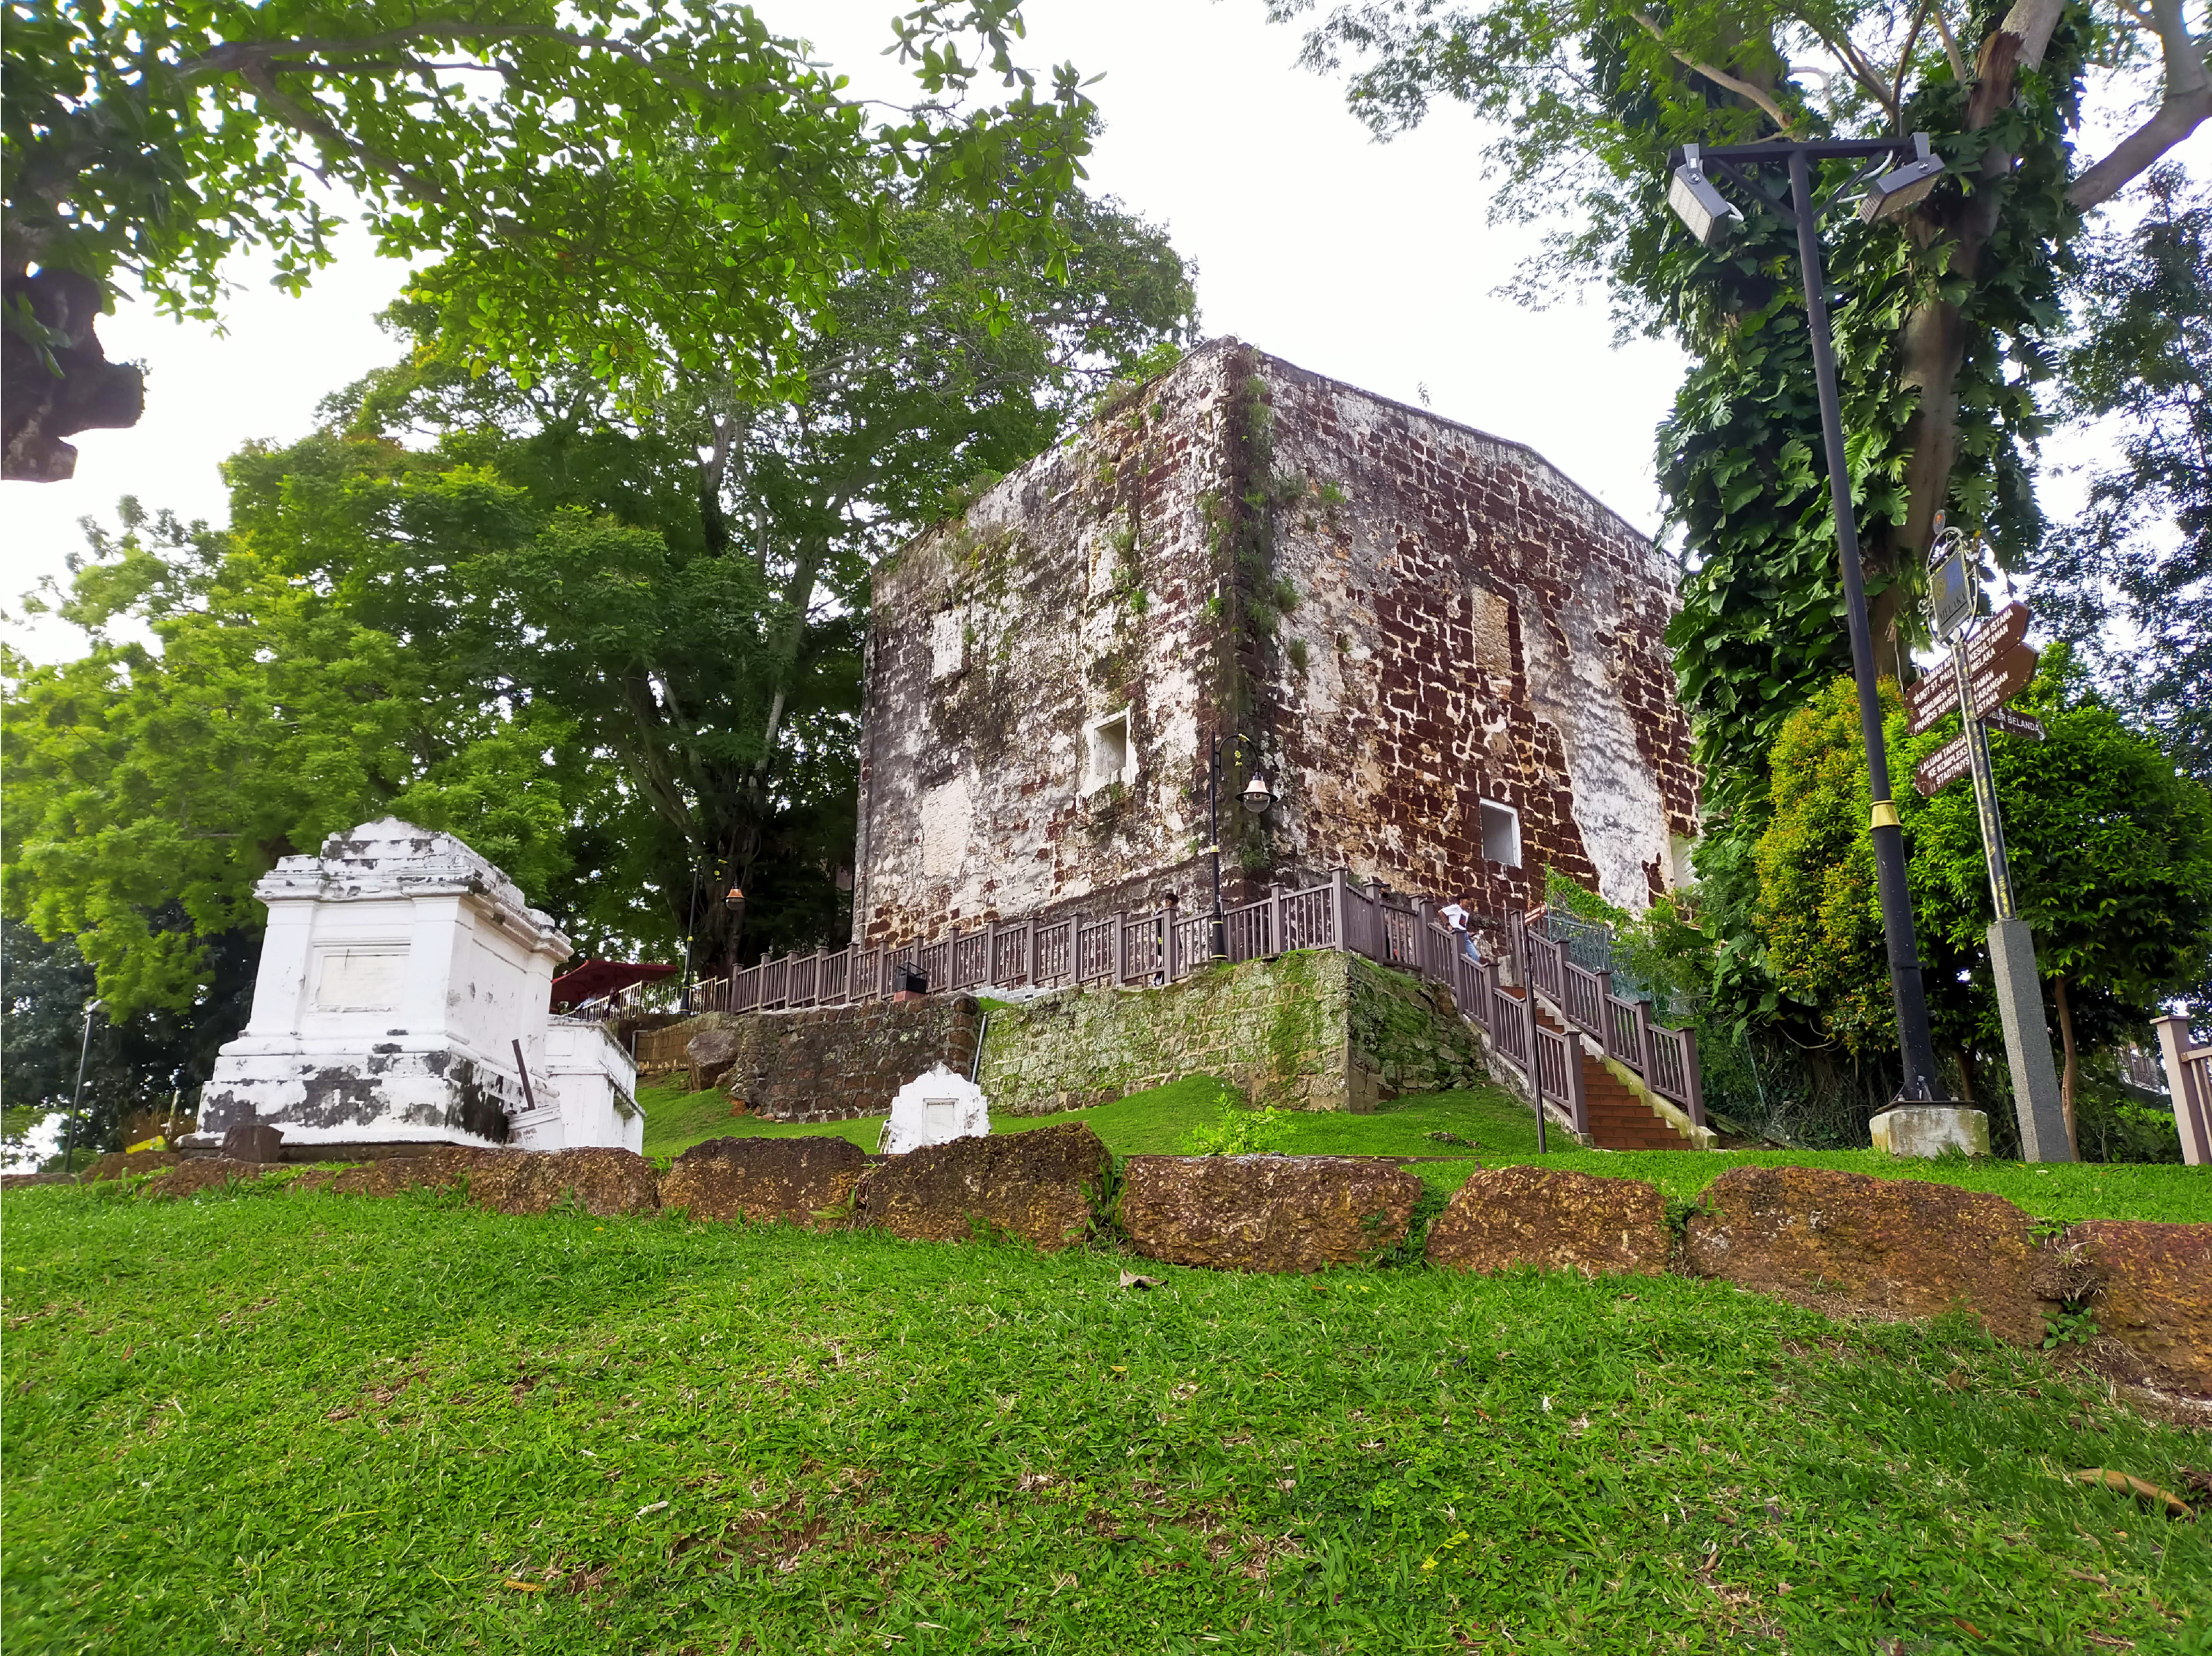 The ruins of St. Paul's Church